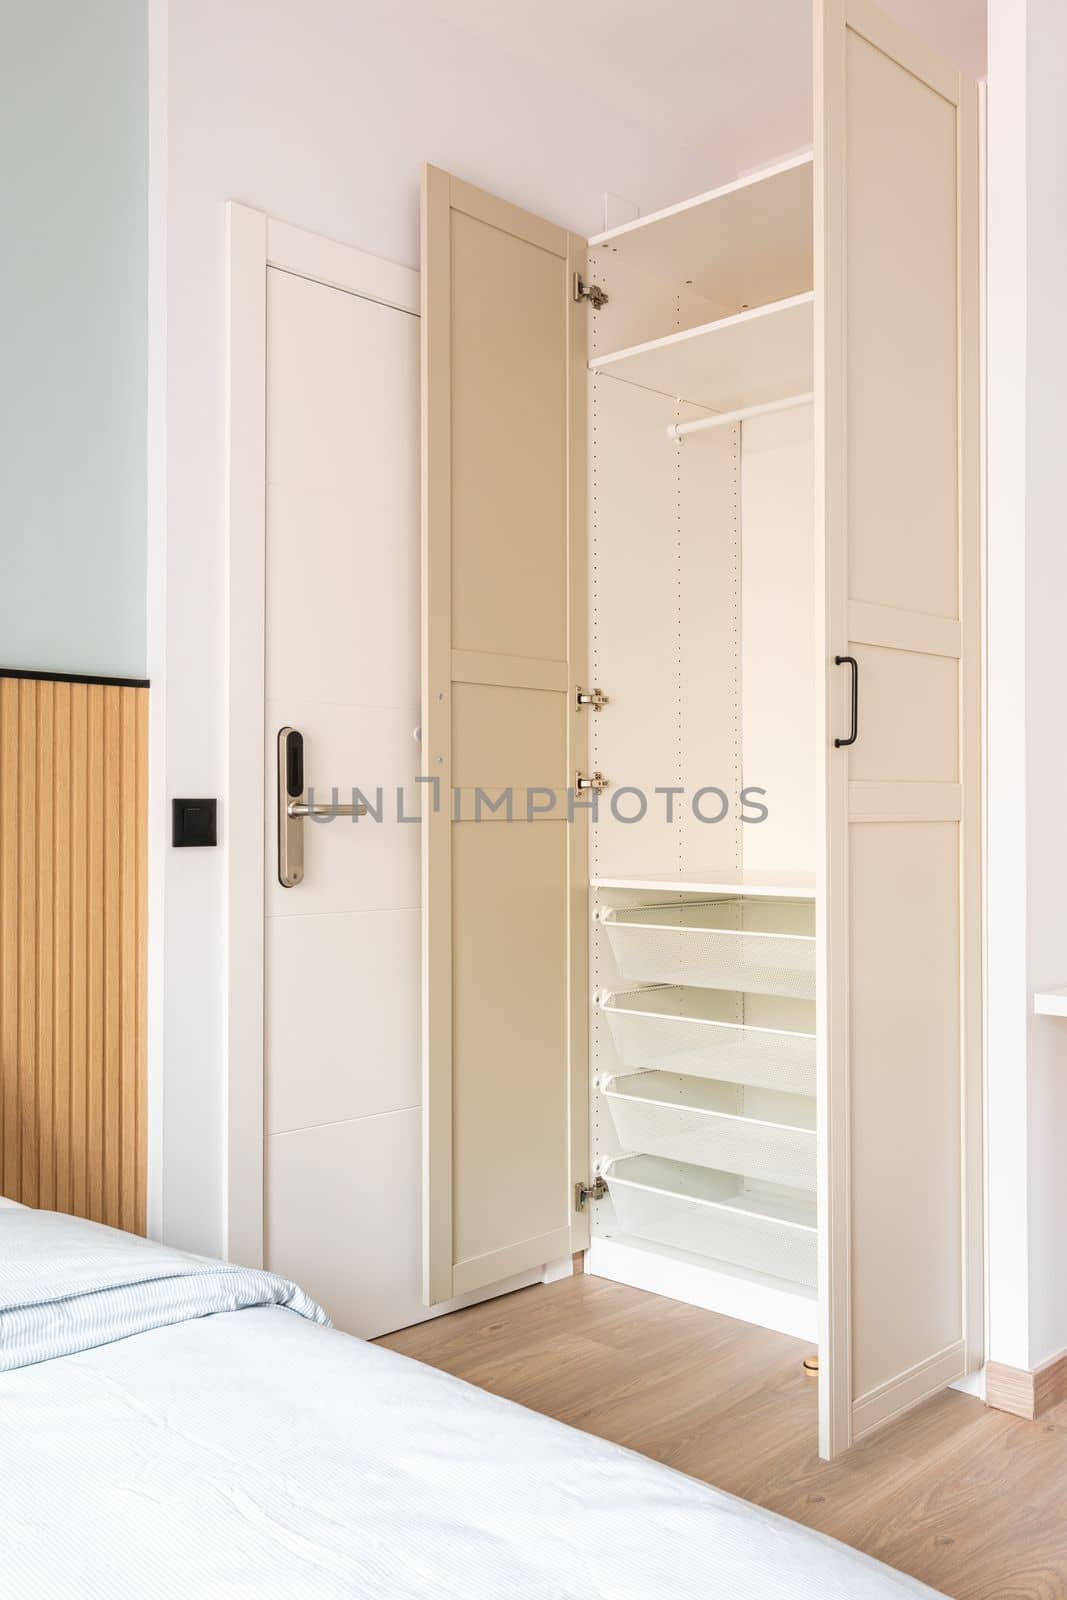 Built-in wooden wardrobe with open doors in beige. Inside the cabinet, all shelves, drawers, crossbars are made of white durable plastic. Entrance to the hotel room with an electronic lock